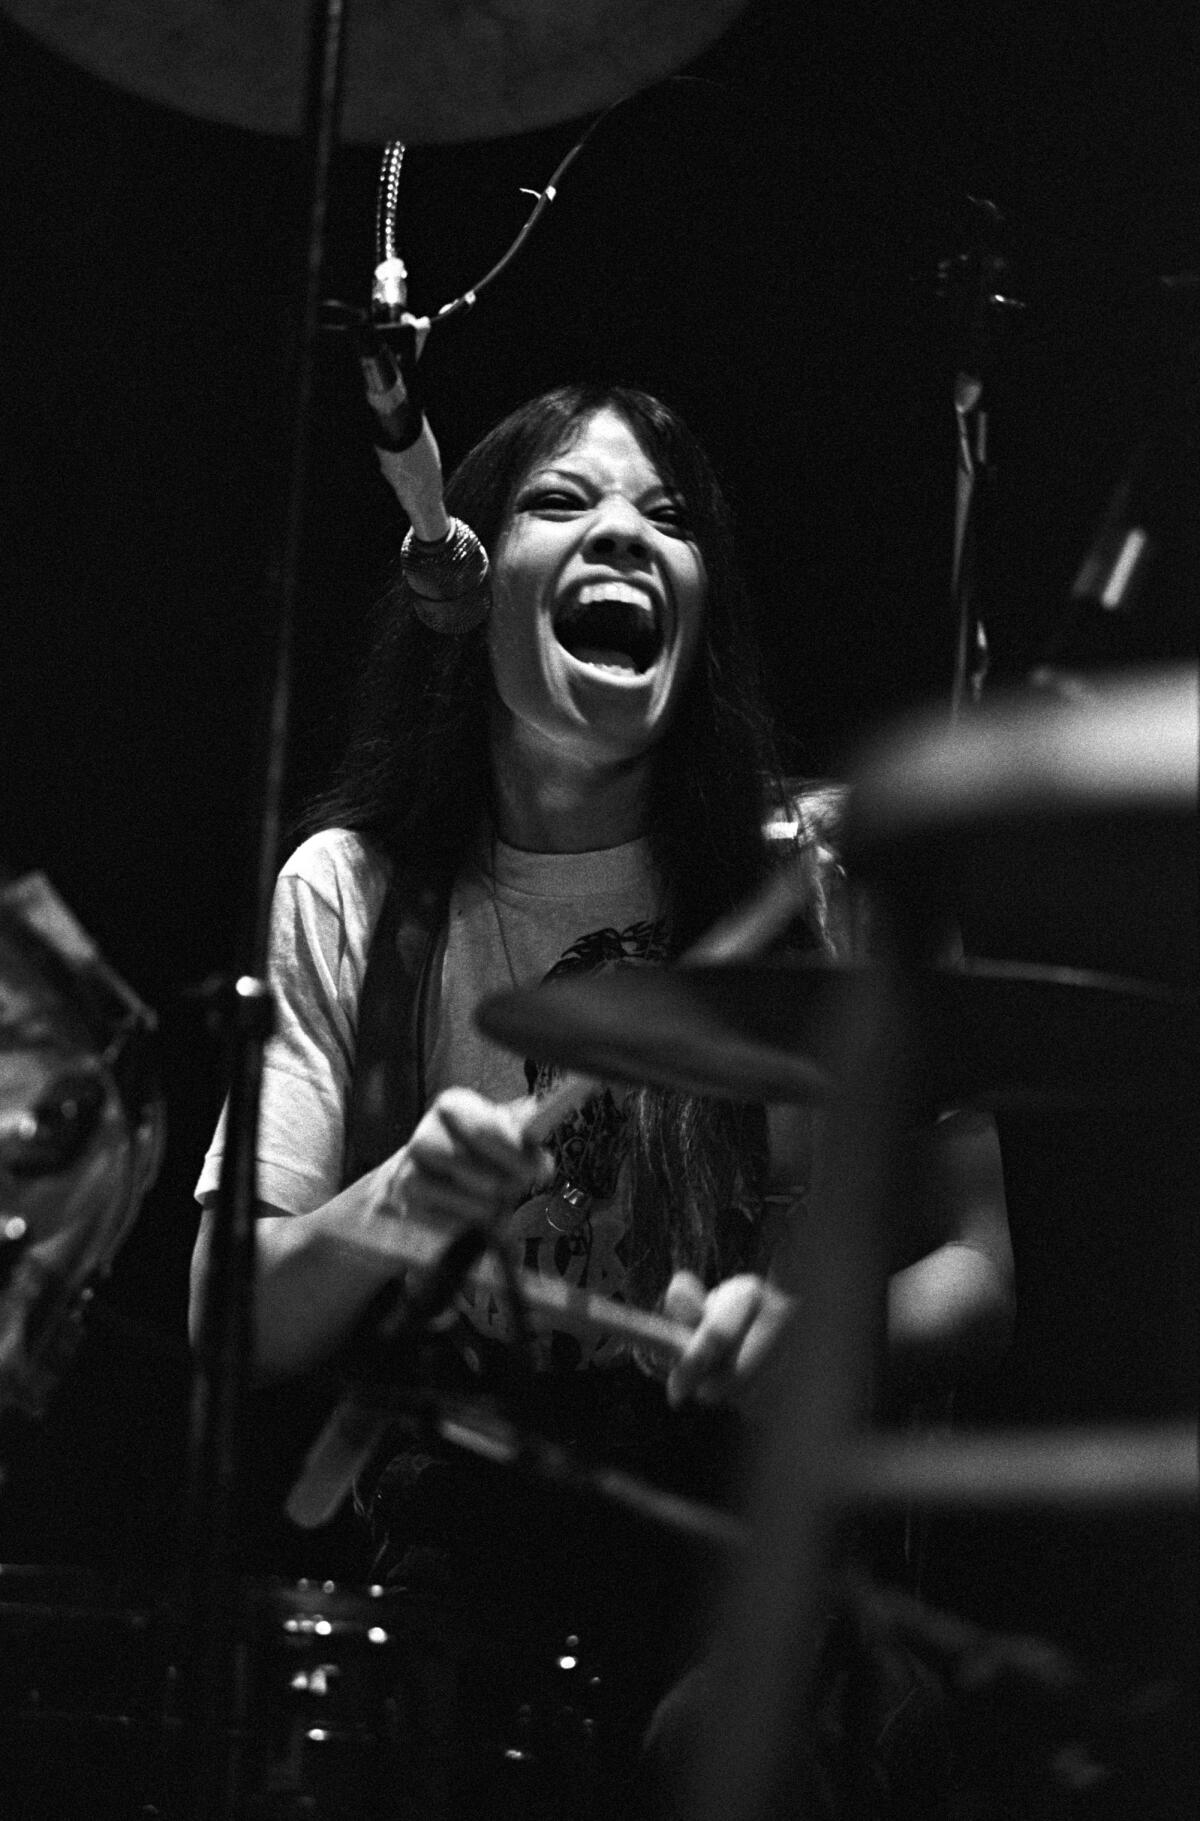 Drummer Brie Brandt-Howard, a.k.a. Brie Darling, performs with Fanny, then known as the L.A. All-Stars, in 1975 in Atlanta.